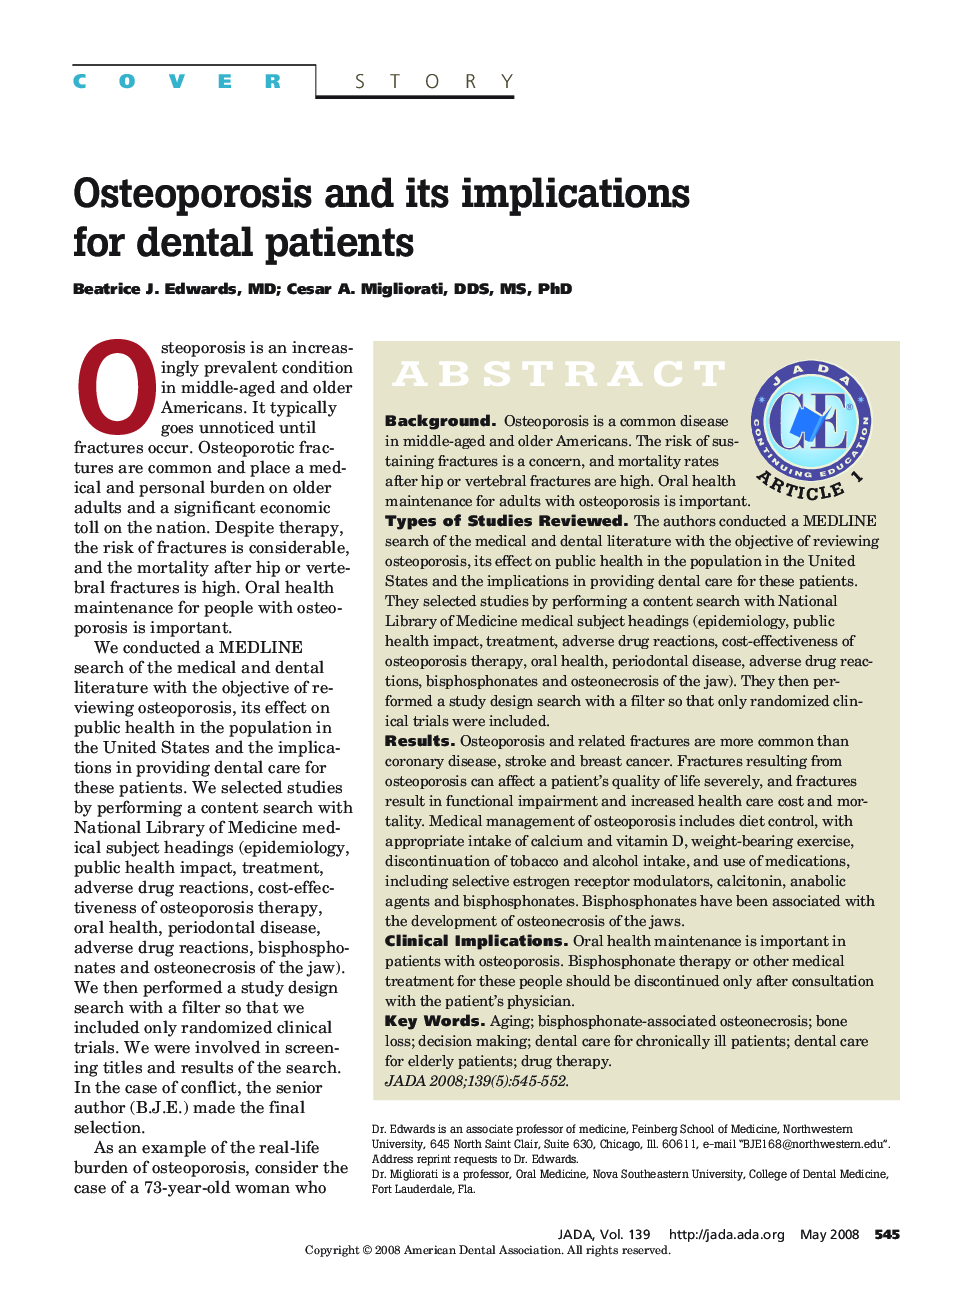 Osteoporosis and Its Implications for Dental Patients 